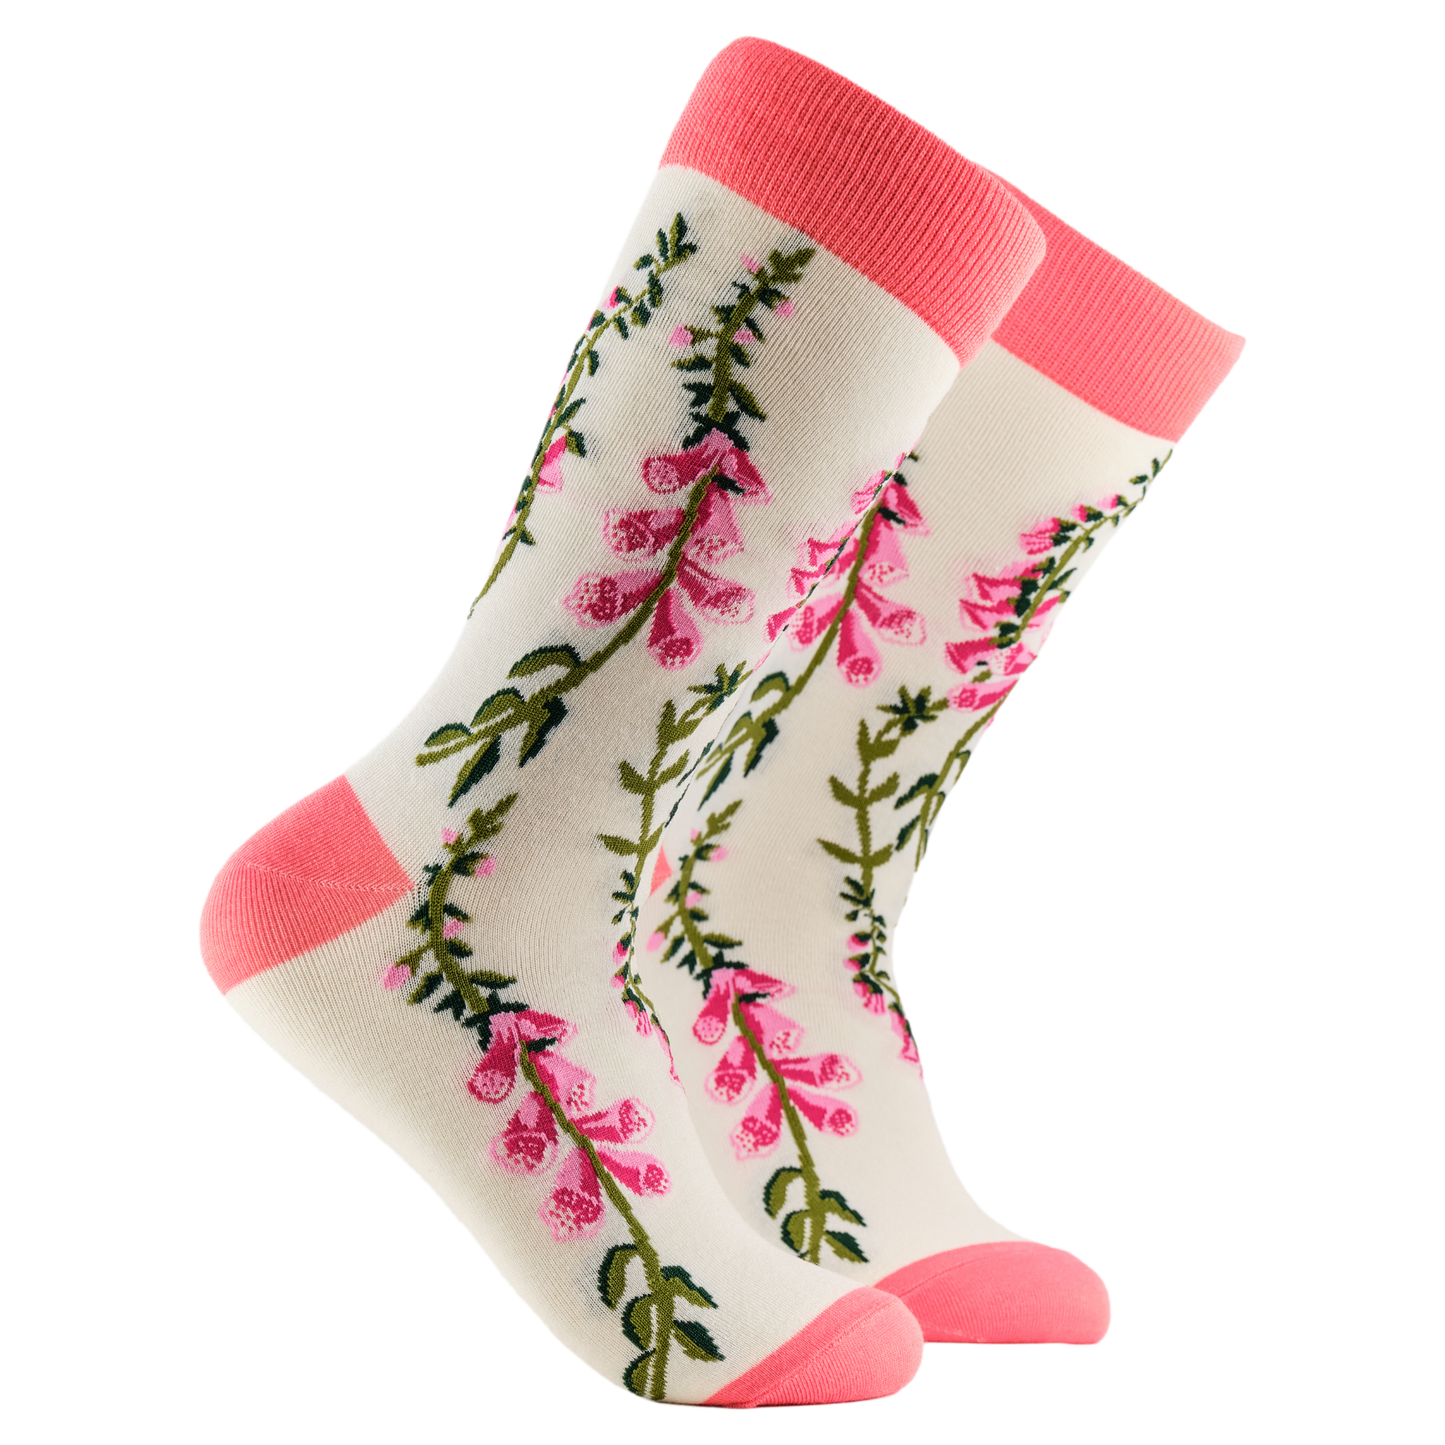 Fox Gloves Floral Bamboo Socks. A pair of socks depicting fox gloves. Cream legs, pink cuff, heel and toe.